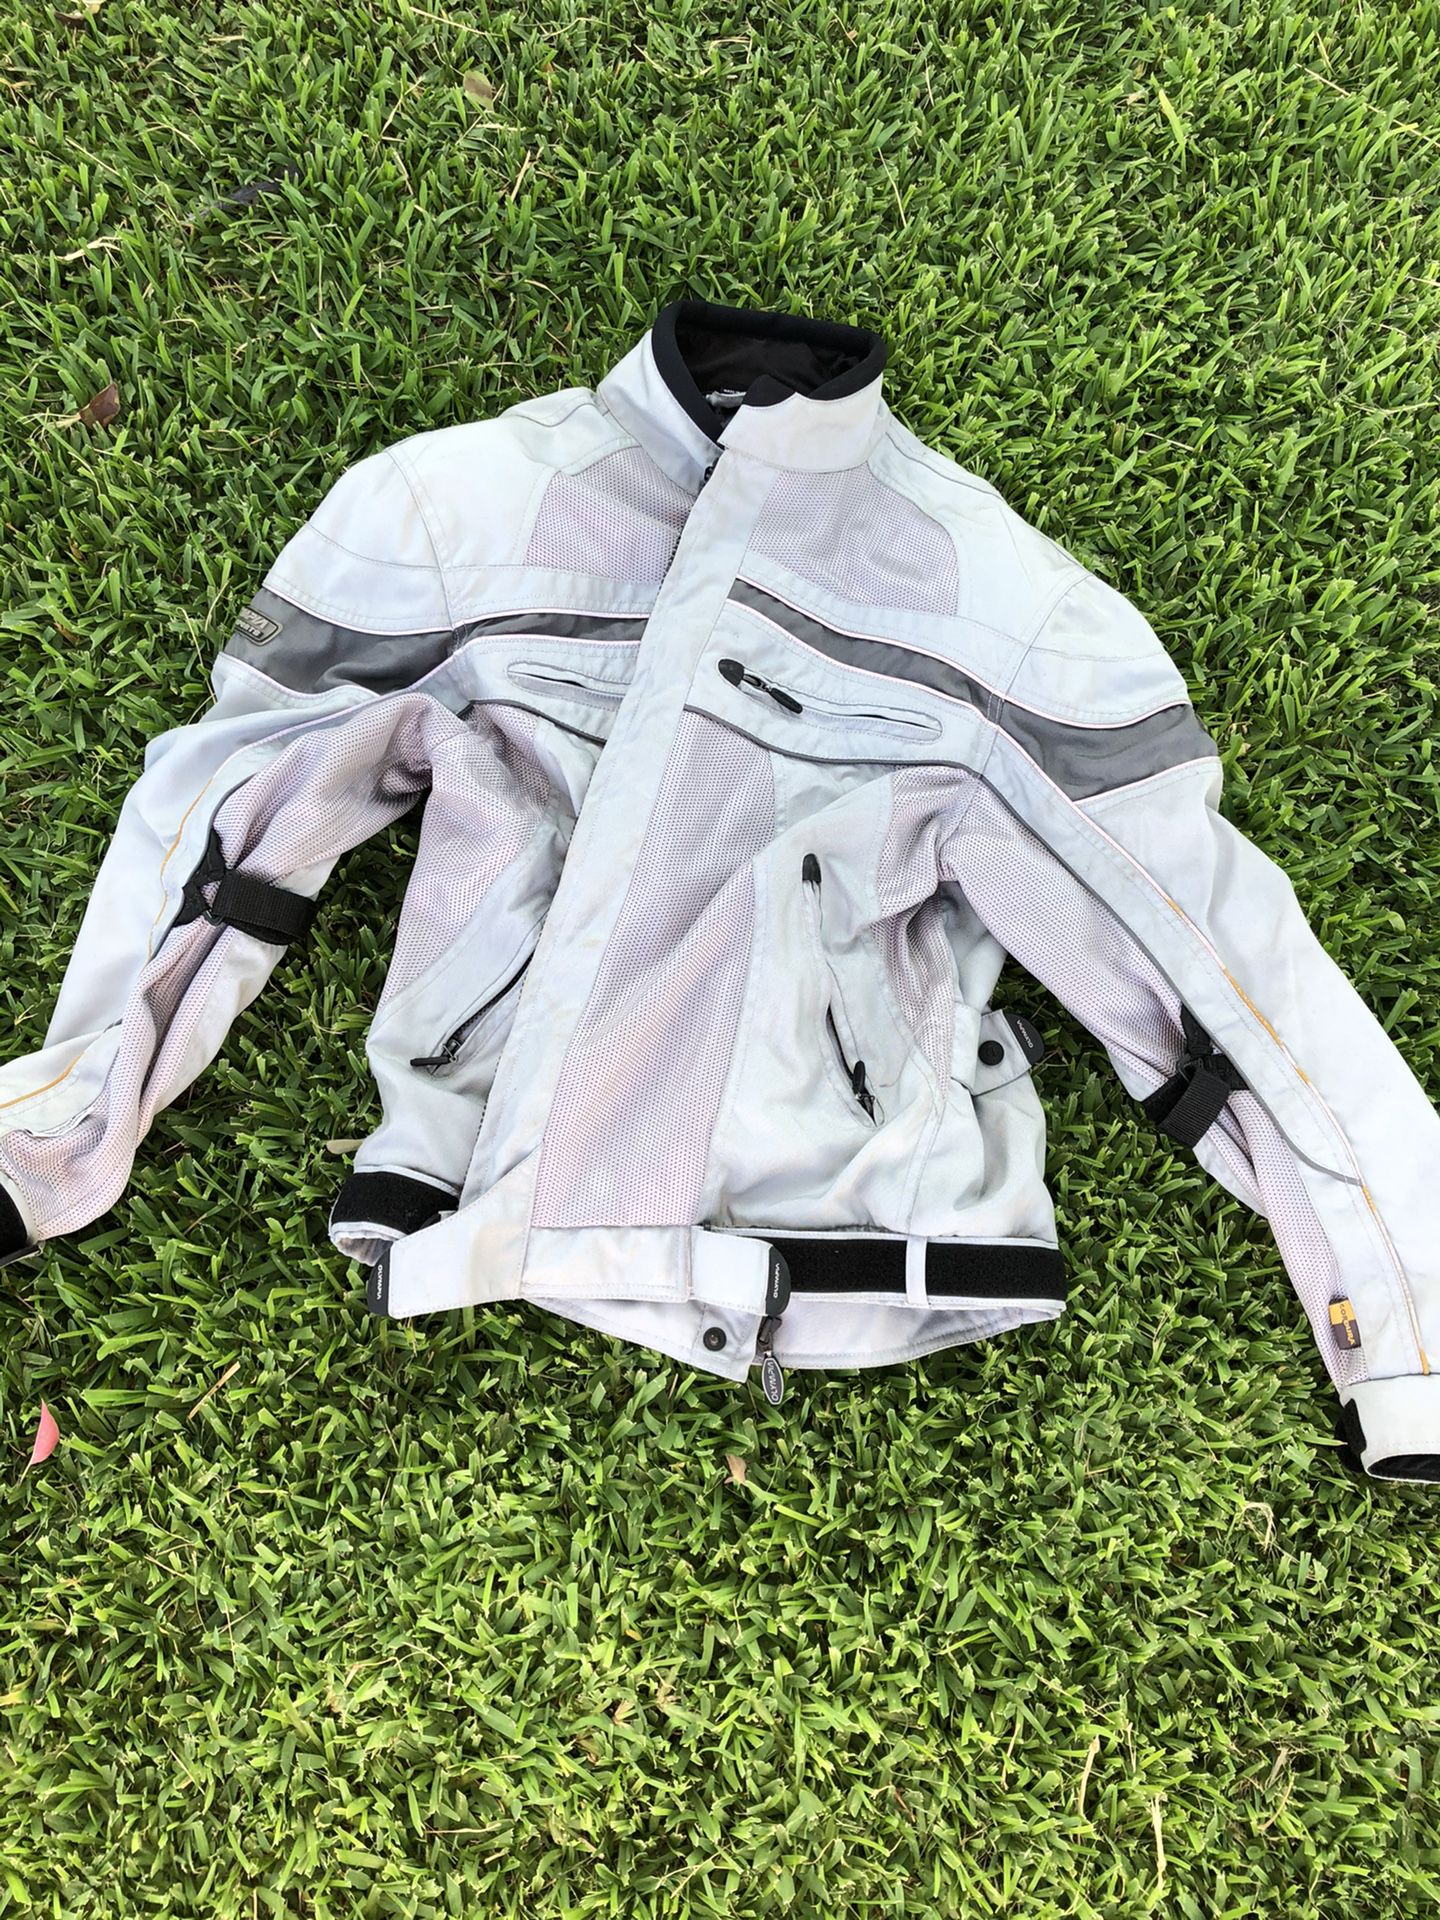 Motorcycle mesh style jackets